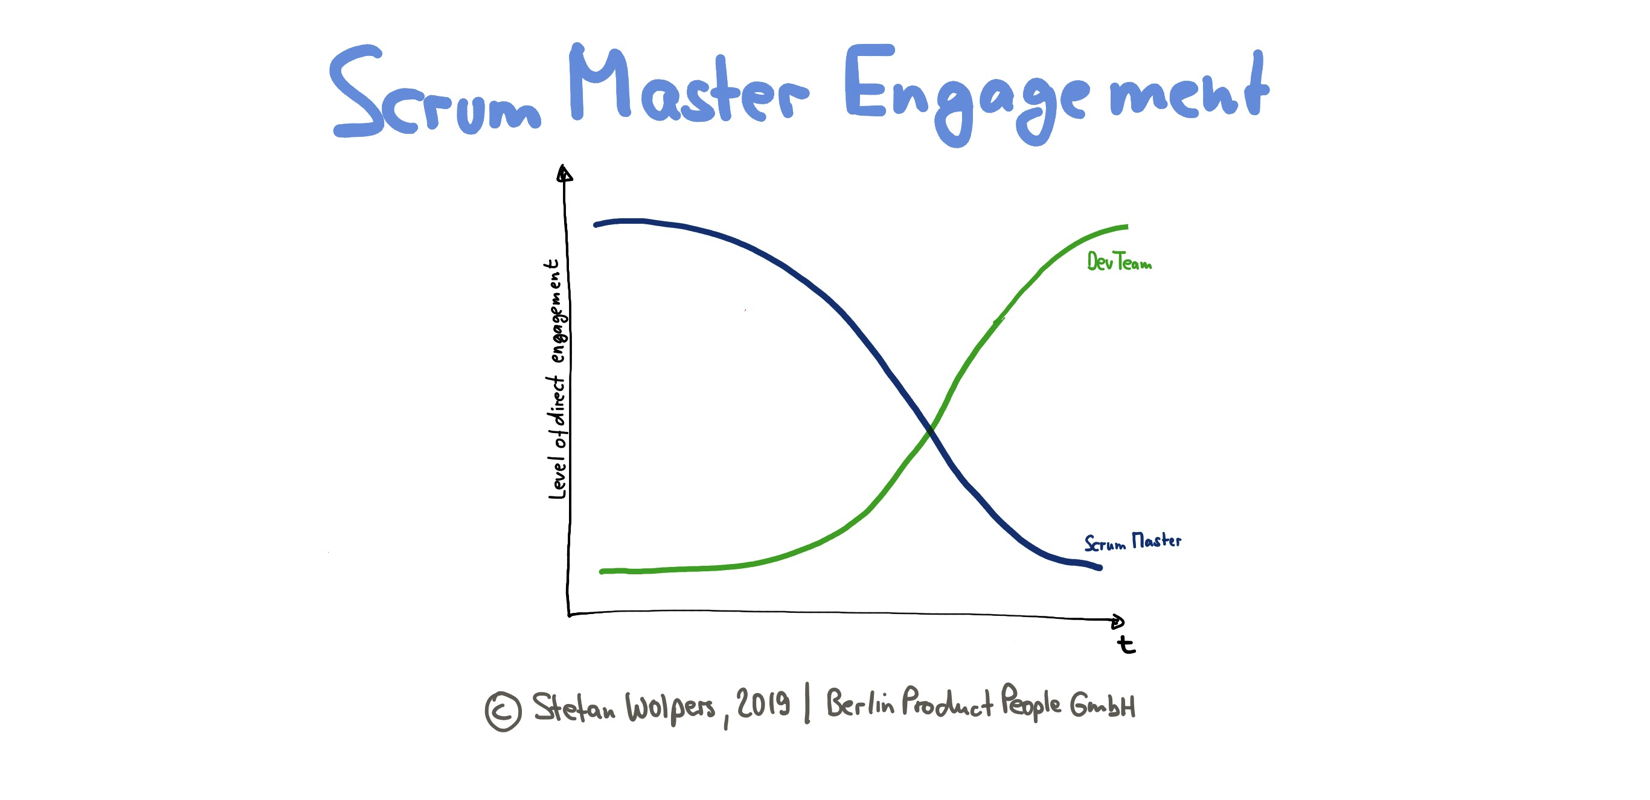 Scrum Master Engagement Patterns: The Development Team — Berlin Product People GmbH